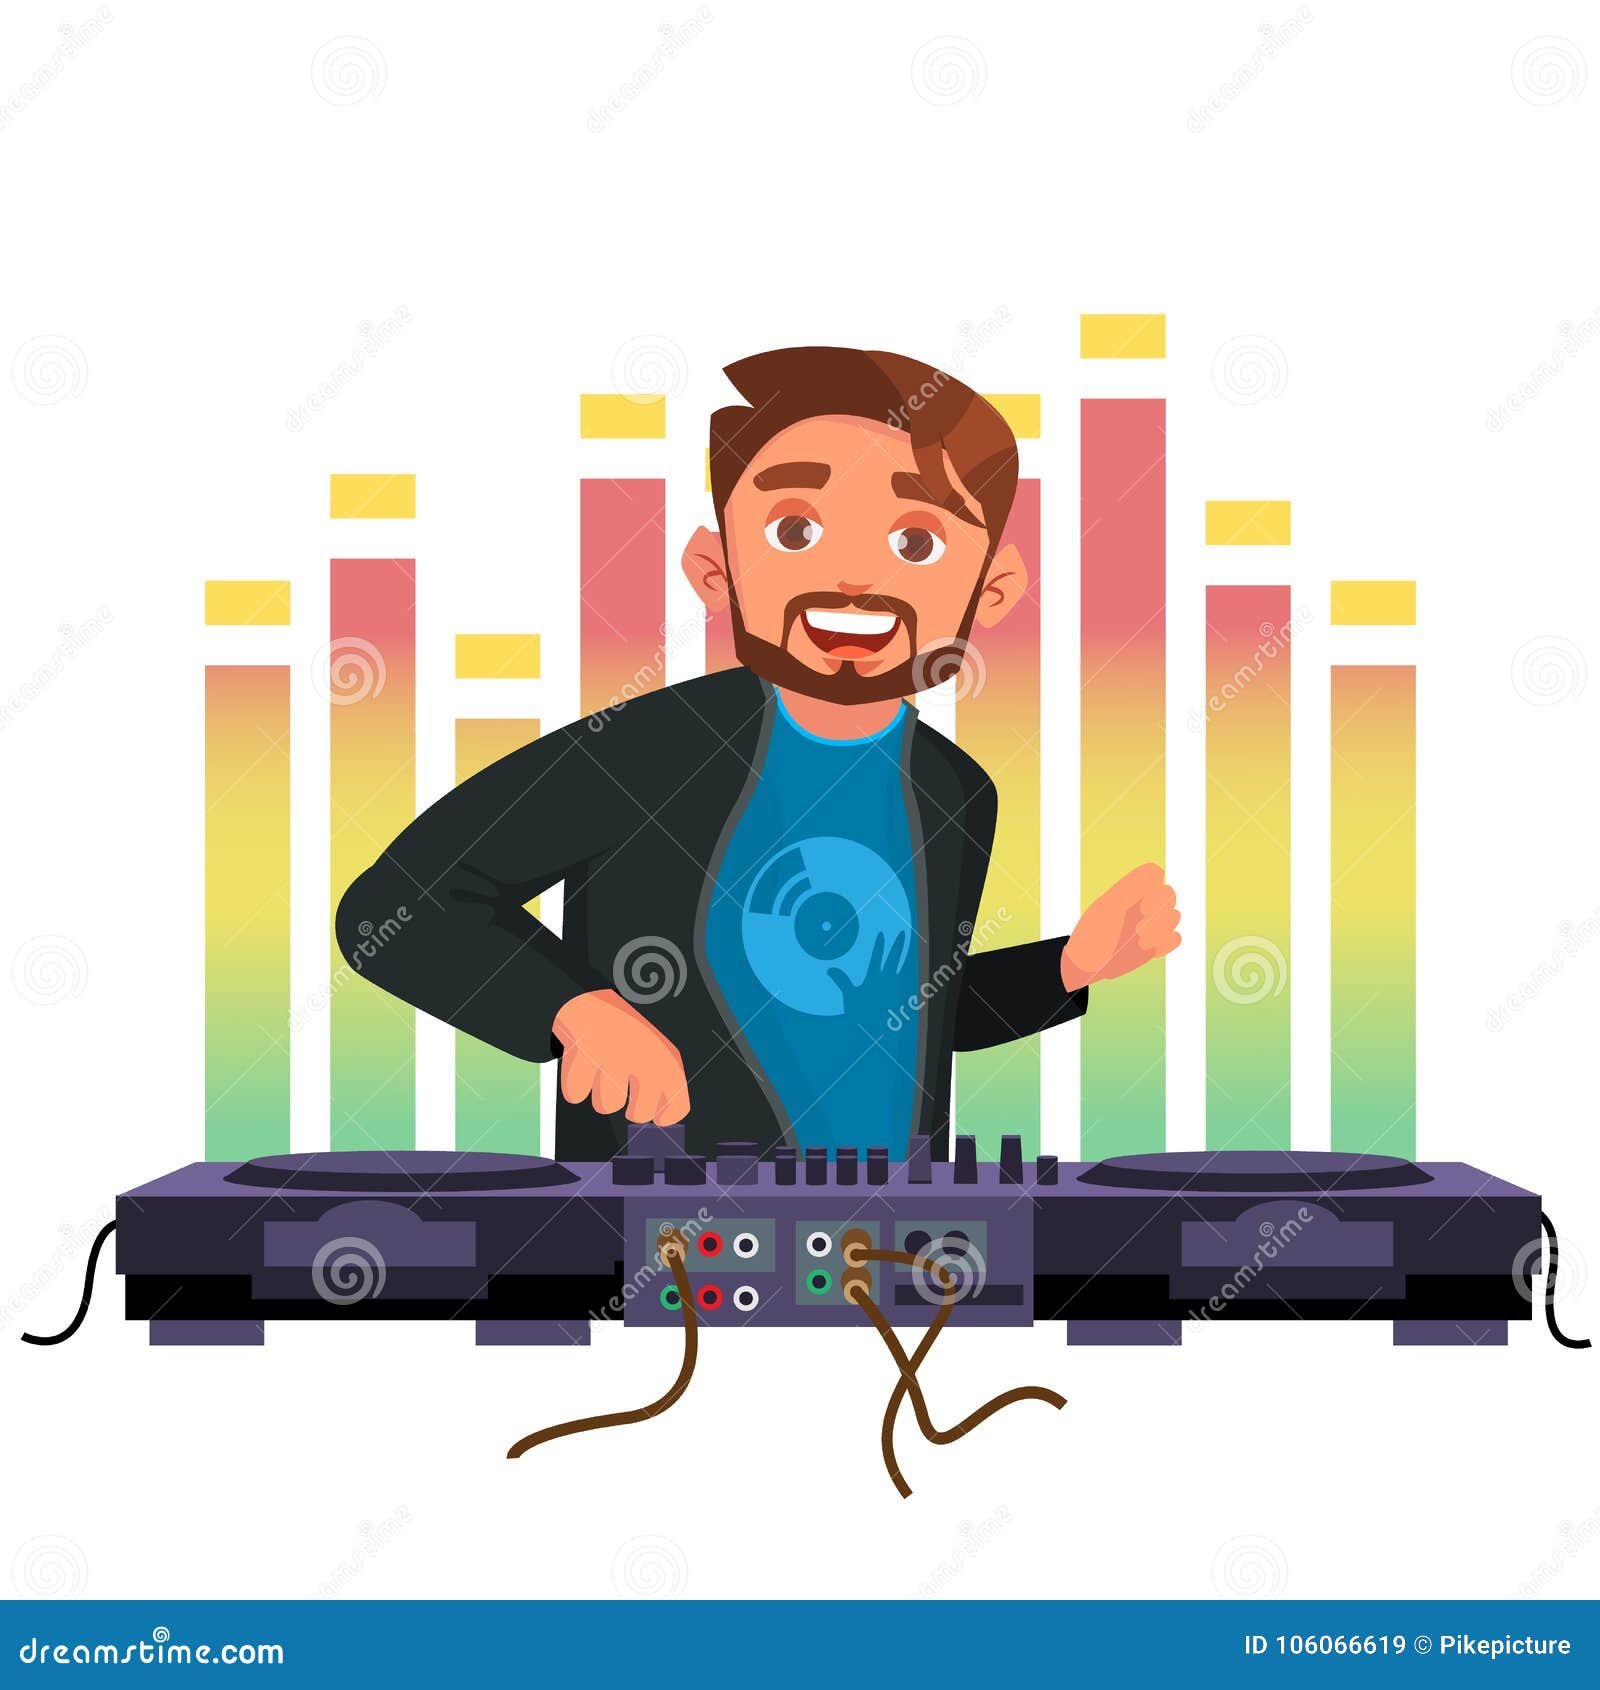 Dj Vector. Playing Disco House Music. Stylish Man. Headphones. Concert  Concept. Flat Cartoon Character Stock Vector - Illustration of playing,  emotional: 106066619